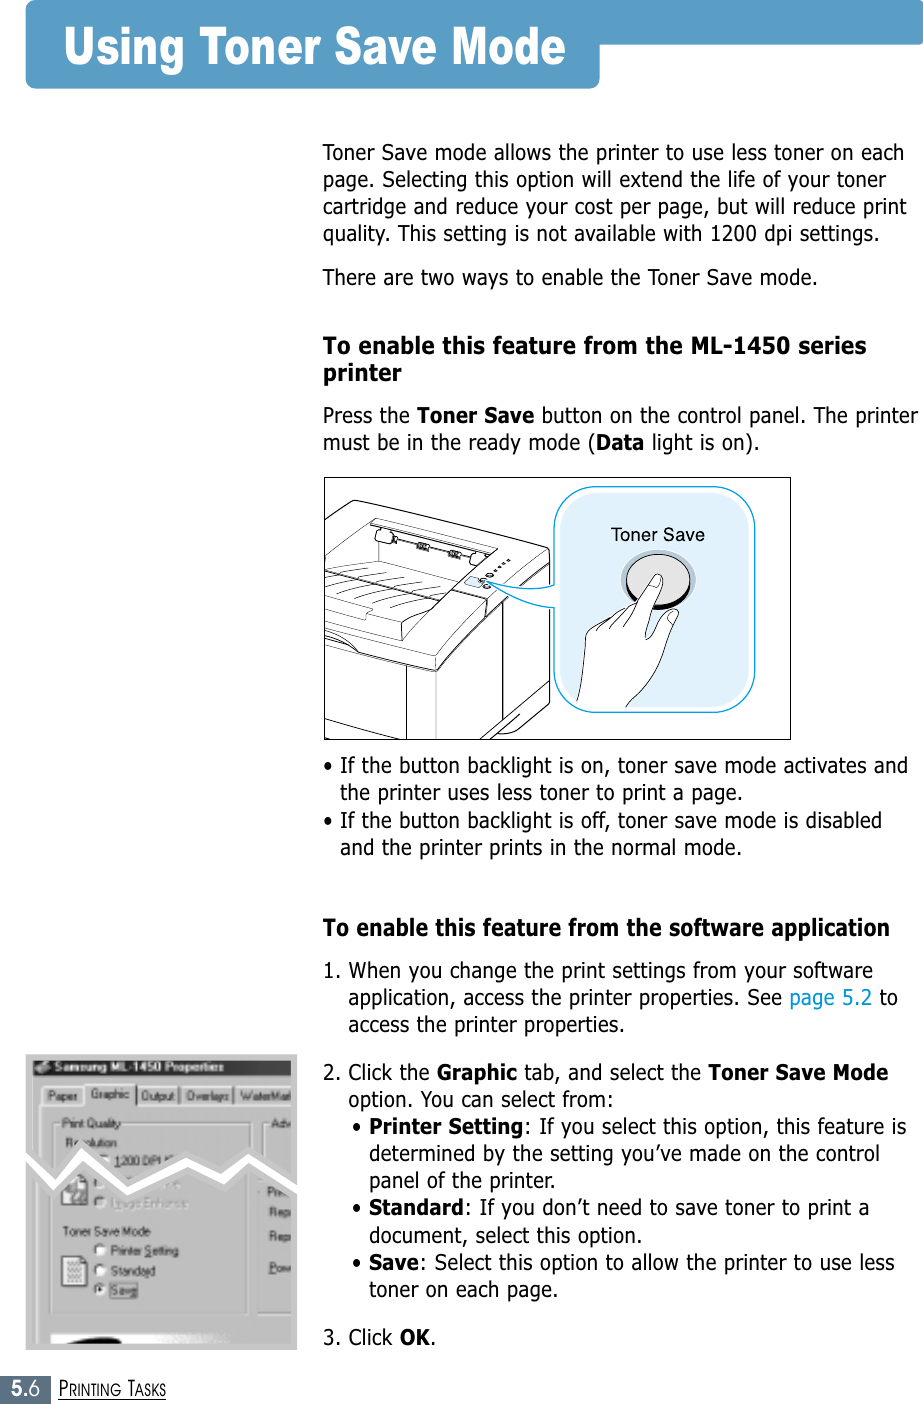 5.6PRINTING TASKSUsing Toner Save ModeToner Save mode allows the printer to use less toner on eachpage. Selecting this option will extend the life of your tonercartridge and reduce your cost per page, but will reduce printquality. This setting is not available with 1200 dpi settings.There are two ways to enable the Toner Save mode.To enable this feature from the ML-1450 seriesprinterPress the Toner Save button on the control panel. The printermust be in the ready mode (Data light is on).• If the button backlight is on, toner save mode activates andthe printer uses less toner to print a page.• If the button backlight is off, toner save mode is disabledand the printer prints in the normal mode.To enable this feature from the software application1. When you change the print settings from your softwareapplication, access the printer properties. See page 5.2 toaccess the printer properties.2. Click the Graphic tab, and select the Toner Save Modeoption. You can select from: • Printer Setting: If you select this option, this feature isdetermined by the setting you’ve made on the controlpanel of the printer.• Standard: If you don’t need to save toner to print adocument, select this option.• Save: Select this option to allow the printer to use lesstoner on each page.3. Click OK.